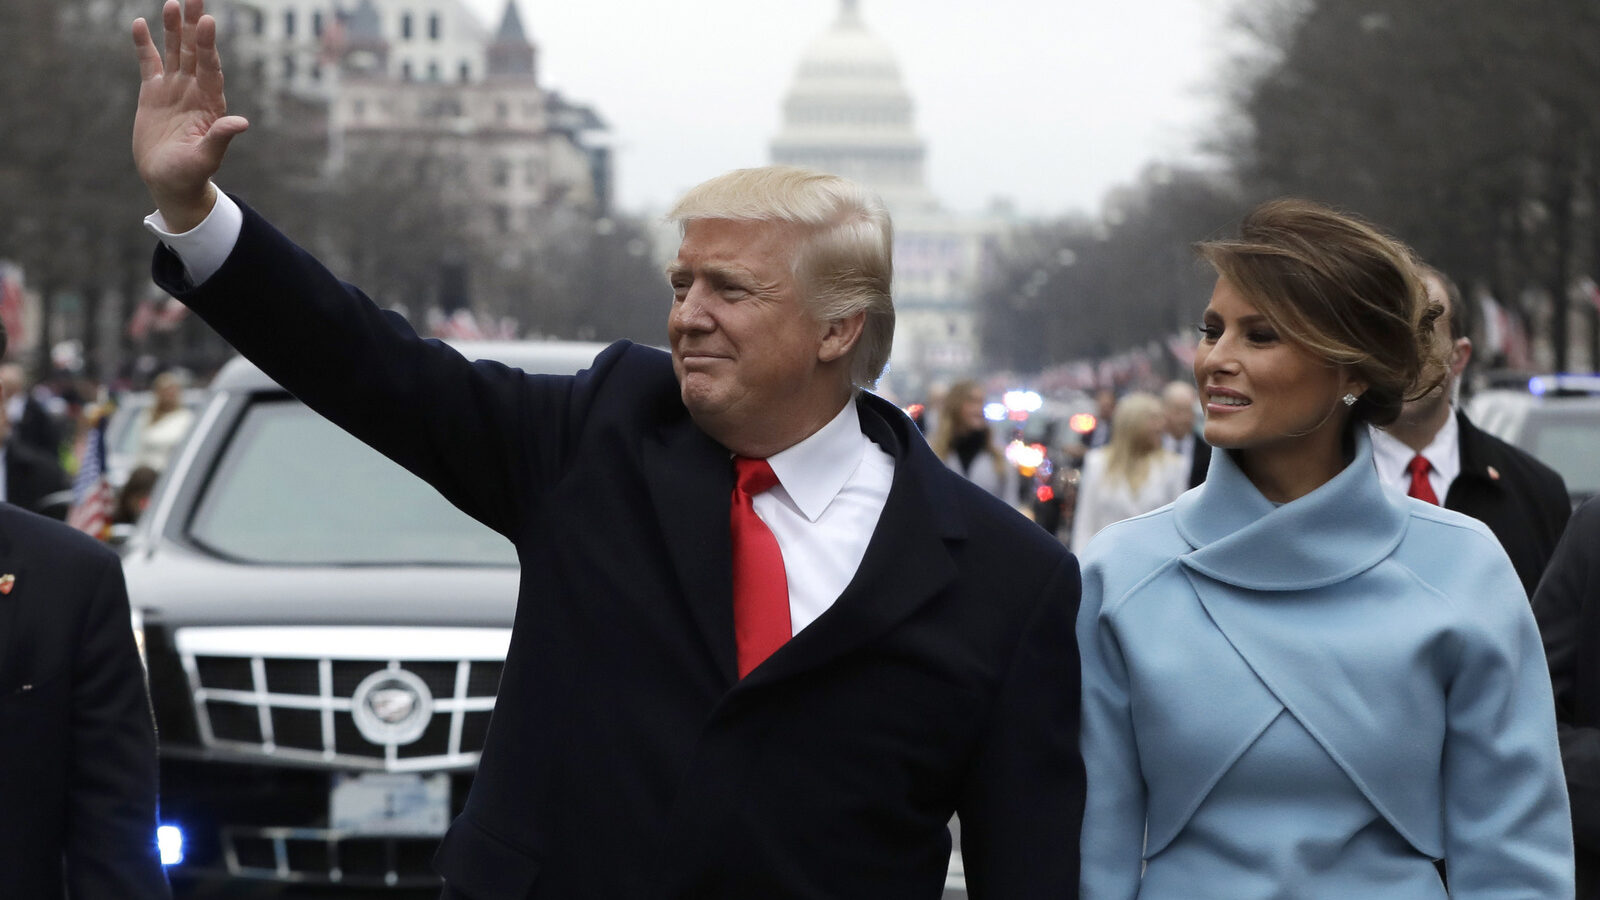 Donald Trump waves as he walks with first lady Melania Trump during the inauguration parade on Pennsylvania Avenue in Washington. Trump raised $107 million for his inaugural festivities. (AP/Evan Vucci)